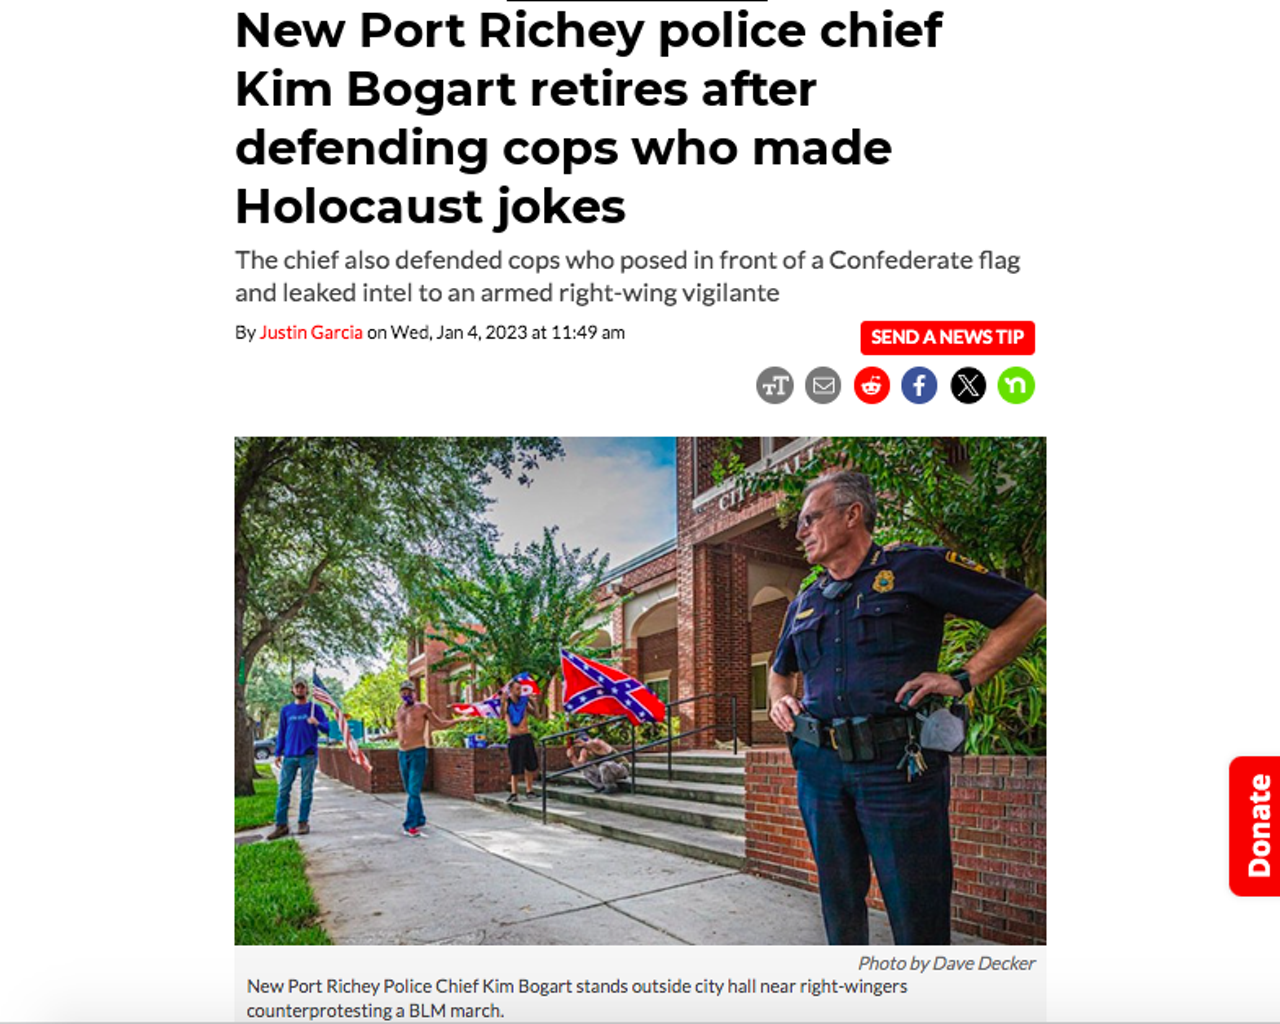 New Port Richey Police Department saw several big scandals over the past two-and-a-half years, but last January the police chief decided to leave the department. As Creative Loafing Tampa Bay previously reported, NPRPD cops have prayed with Proud Boys, posed in front of a Confederate flag, leaked department intel to an armed right-wing vigilante and falsely accused a Black man of a felony, among other incidents. Read the full story here. 